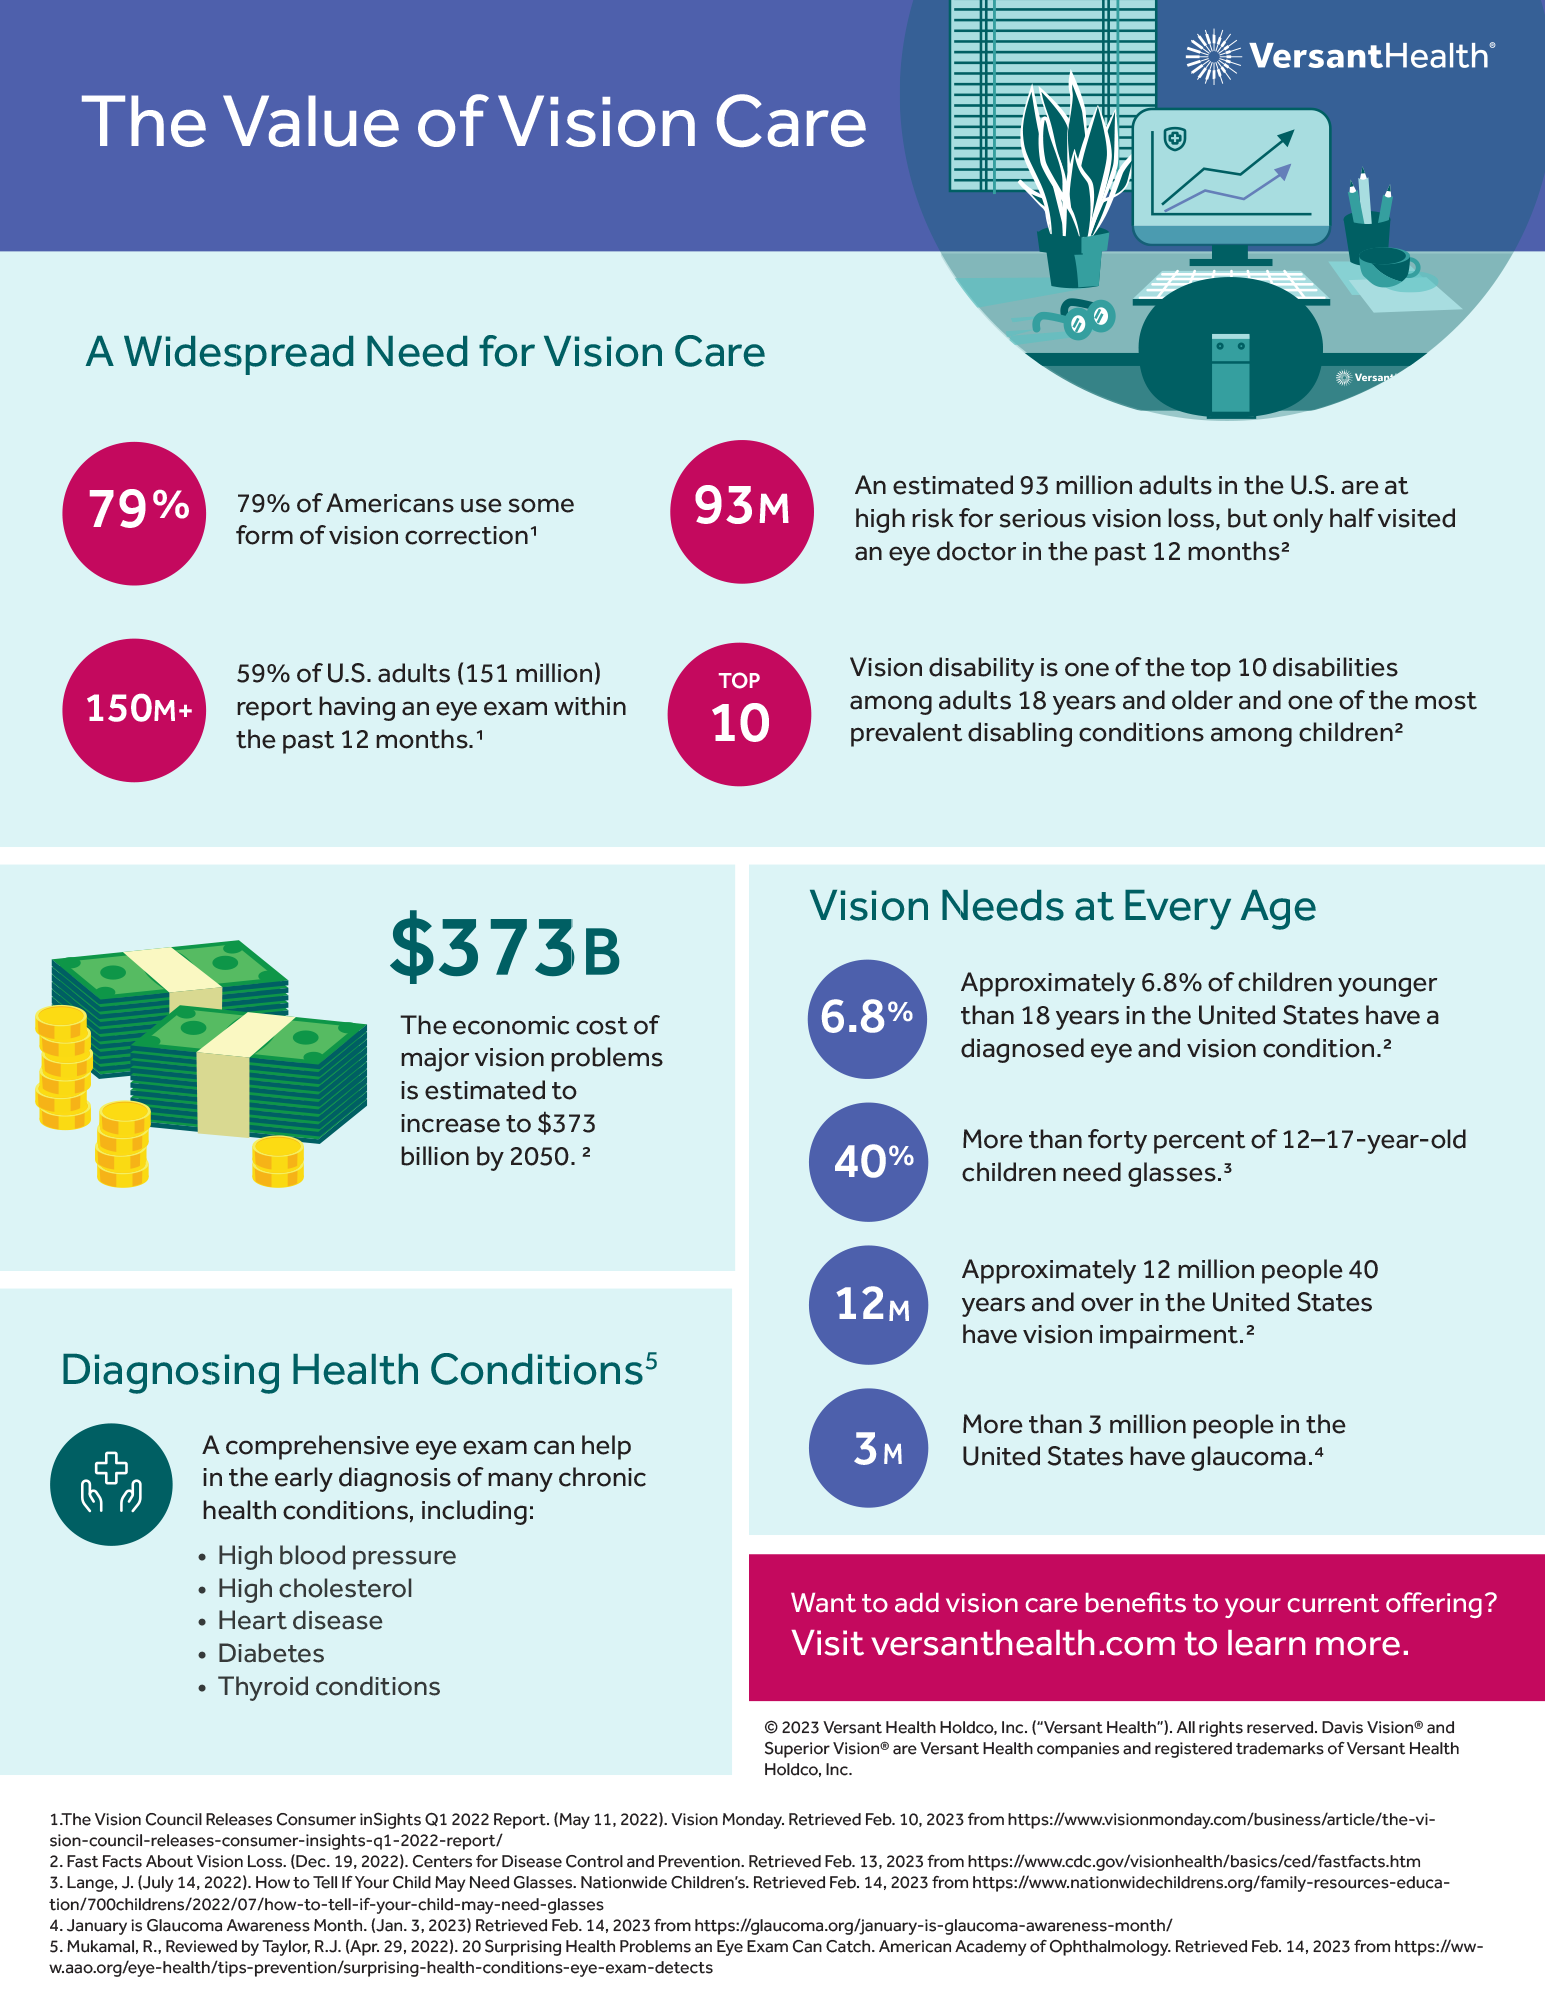 An infographic that discusses the widespread need of vision care